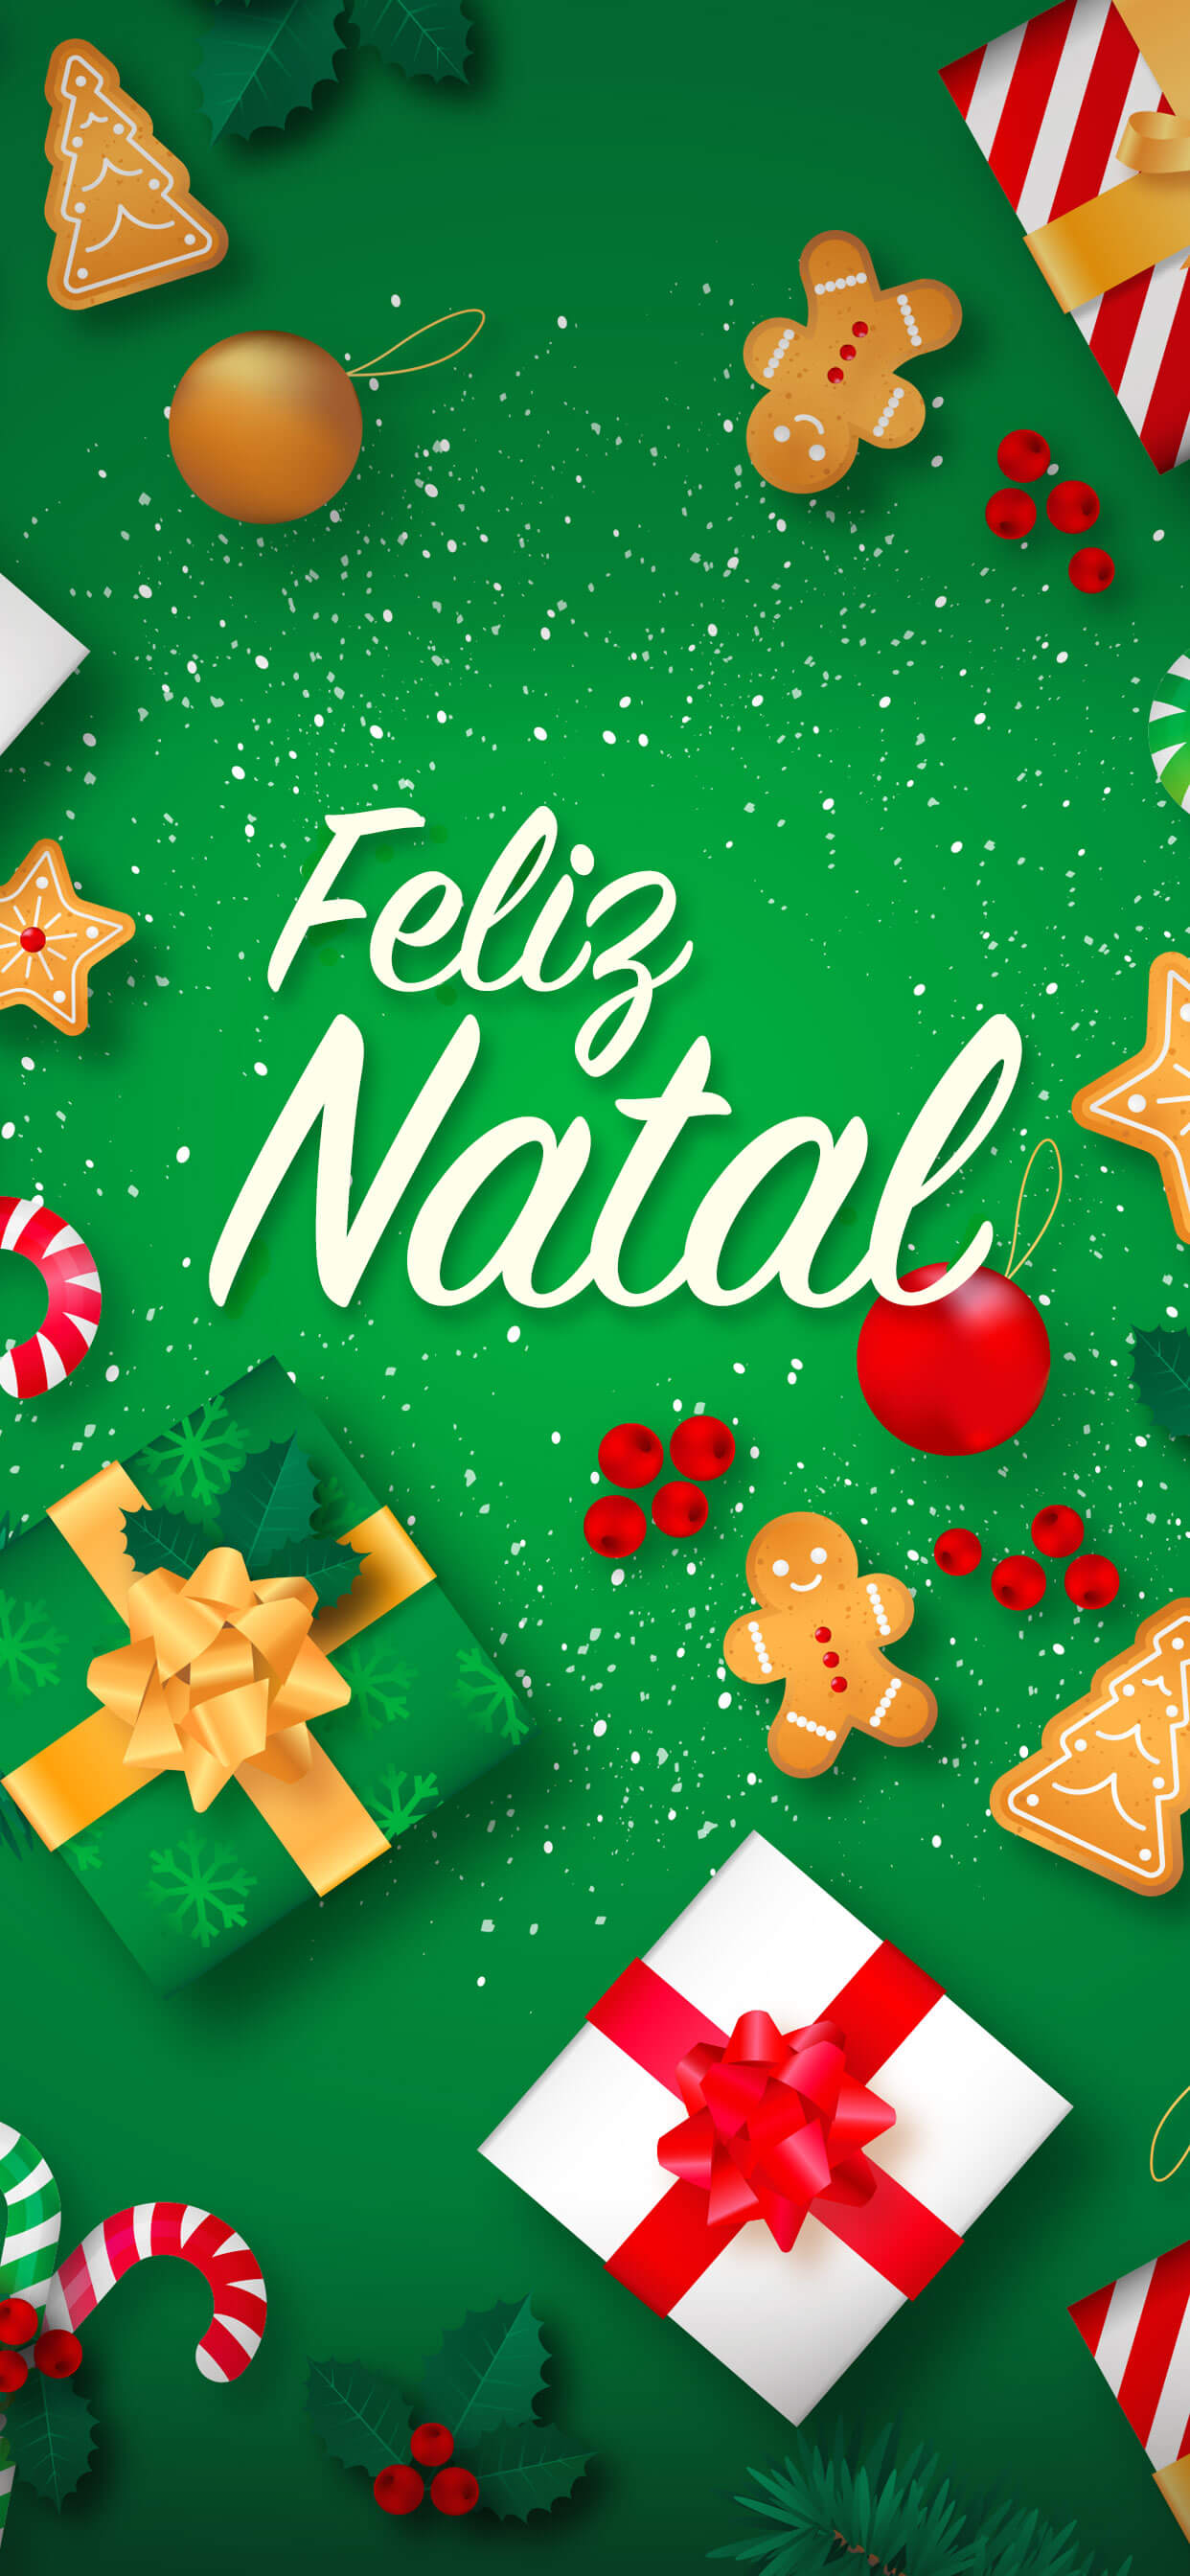 747 Wallpaper A Natal Pictures - MyWeb